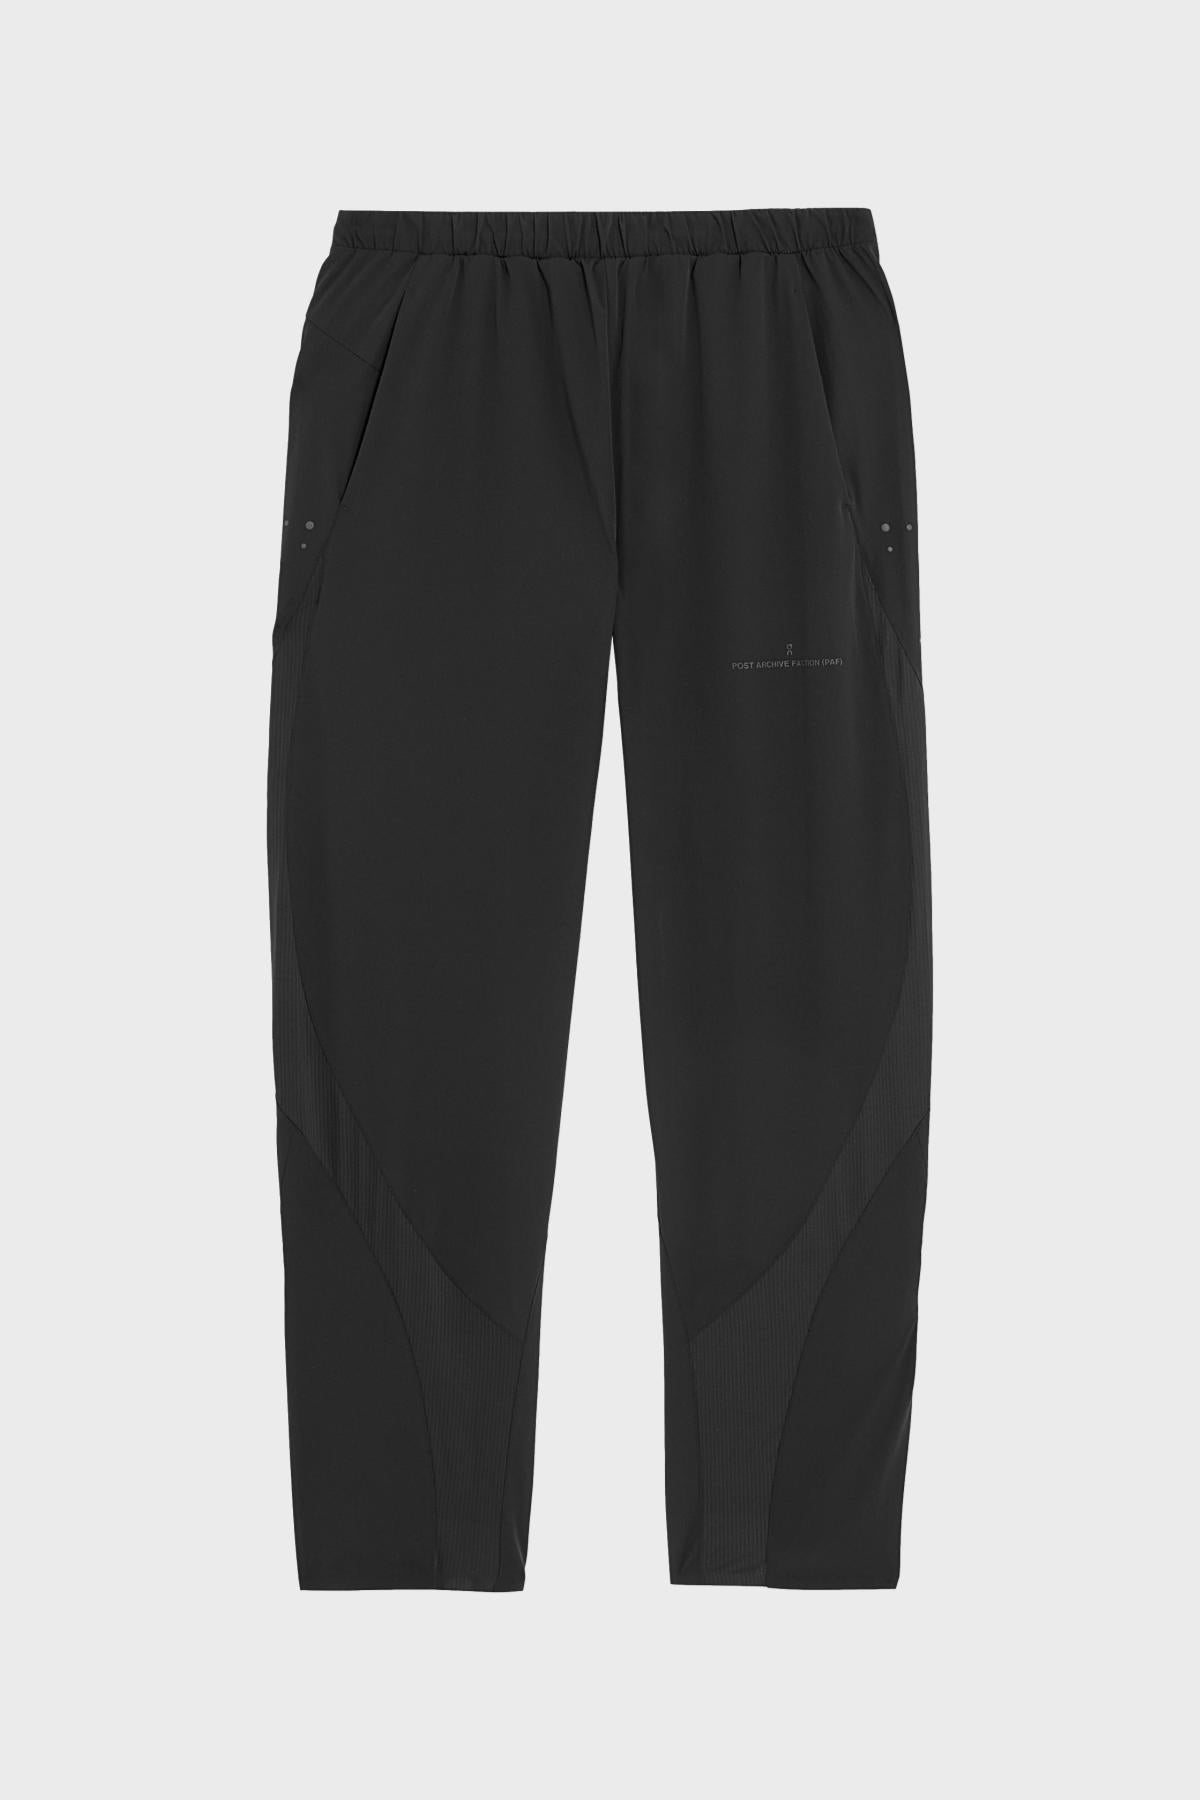 ON - RUNNING PANTS PAF